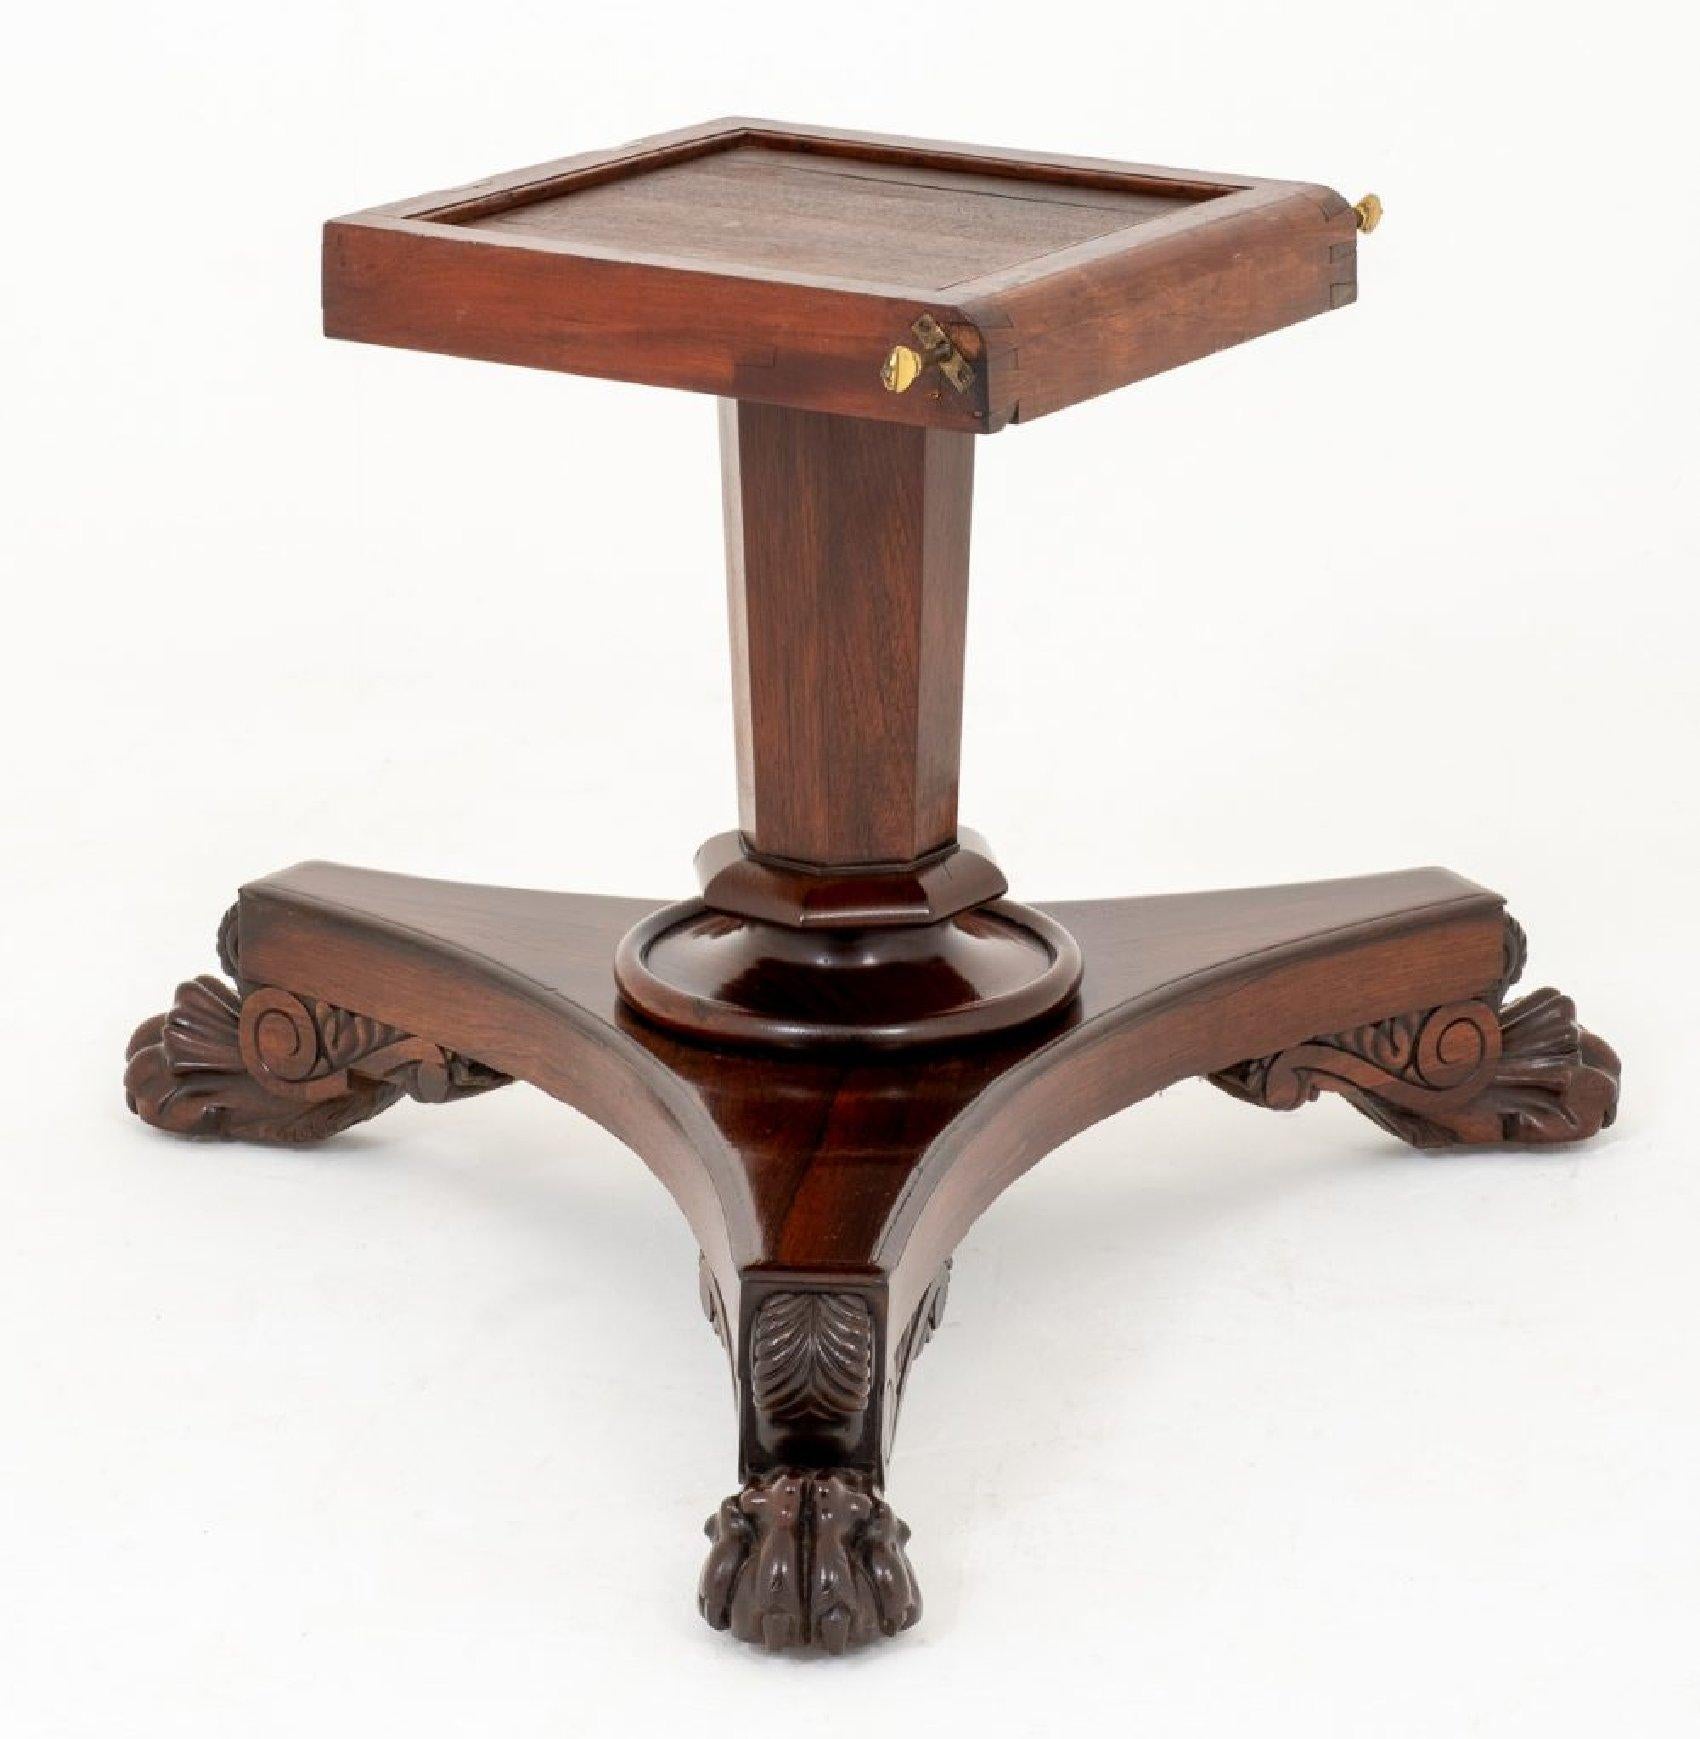 This superb early 19th century circular breakfast table is rosewood and is supported on a tri form base with a central column. The table features a lovely detailed edge on the top and ornate hairy paw scrolled feet on the base. It measures 54 in -